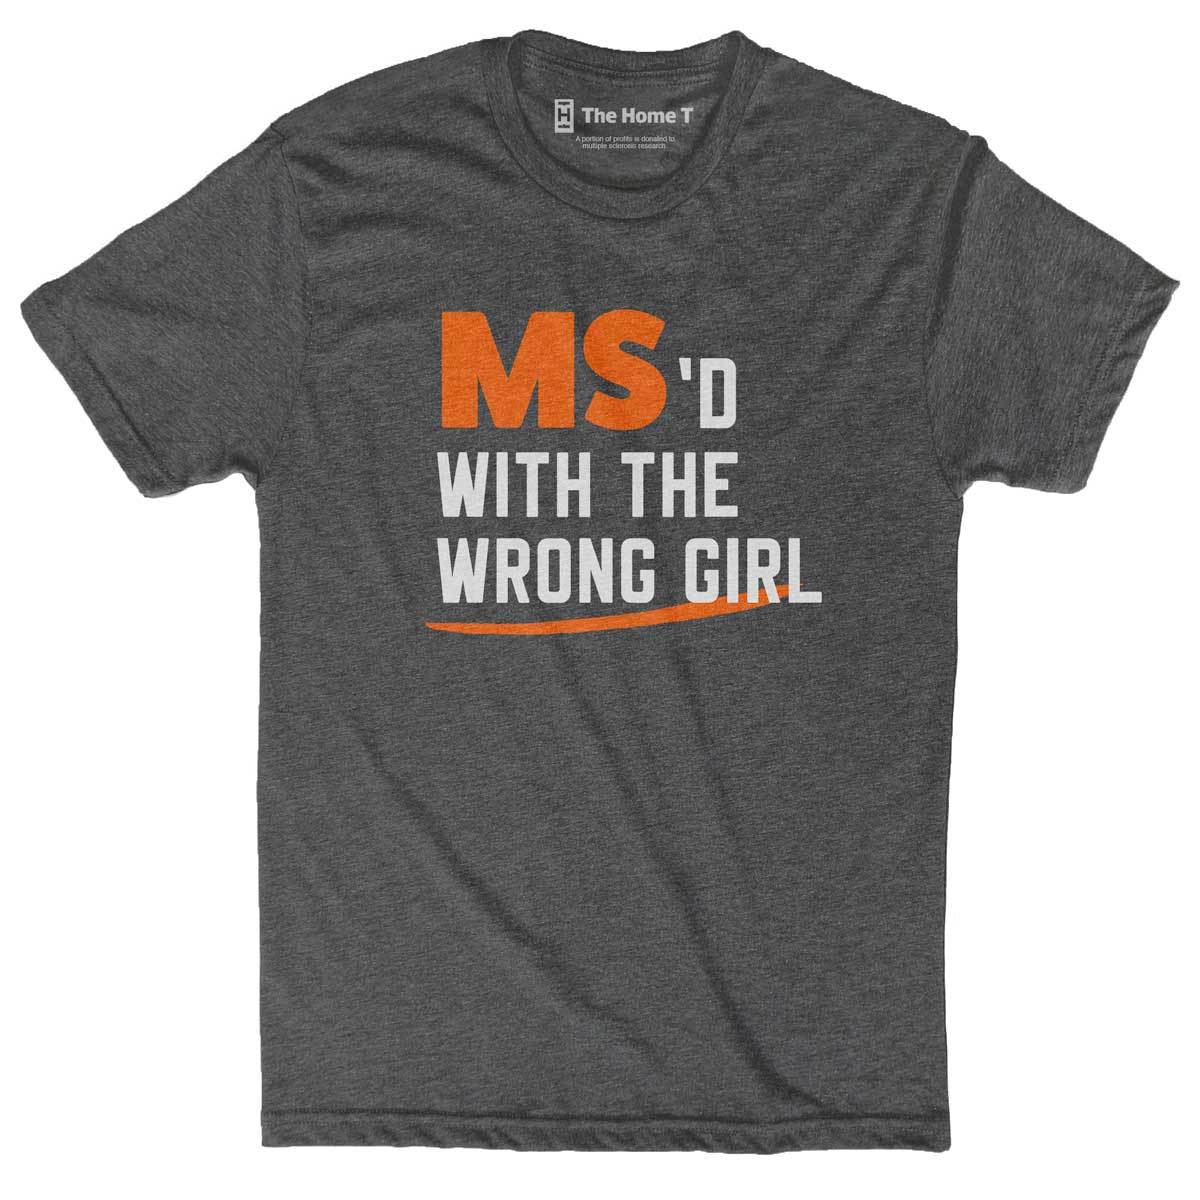 MS'd with the Wrong Girl